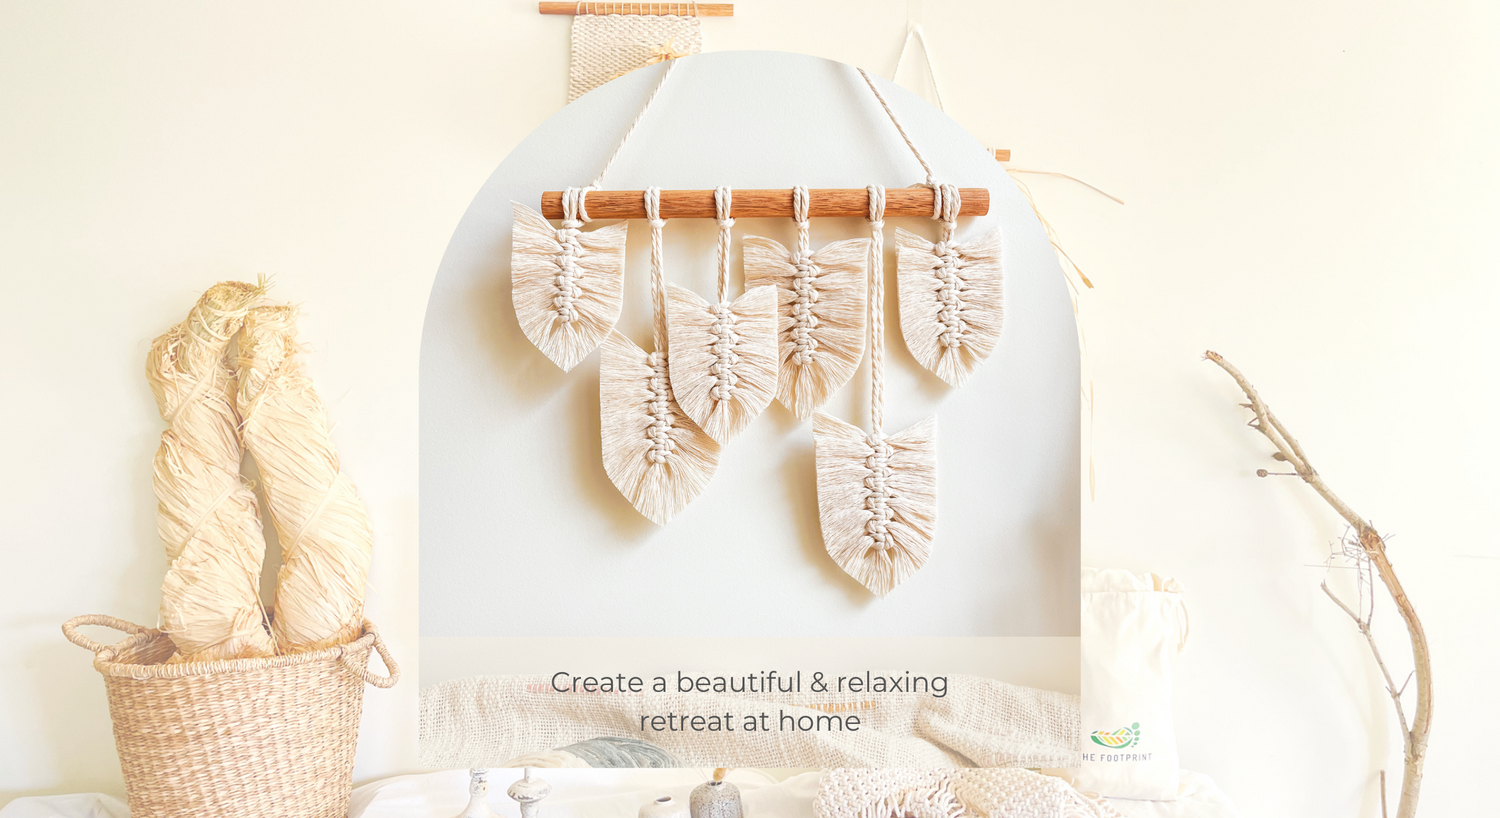 The Footprint - Boho coastal decor store banner with natural raffia and macrame feather wall hagning with the tag line " Create a beautiful and relaxing retreat at home"